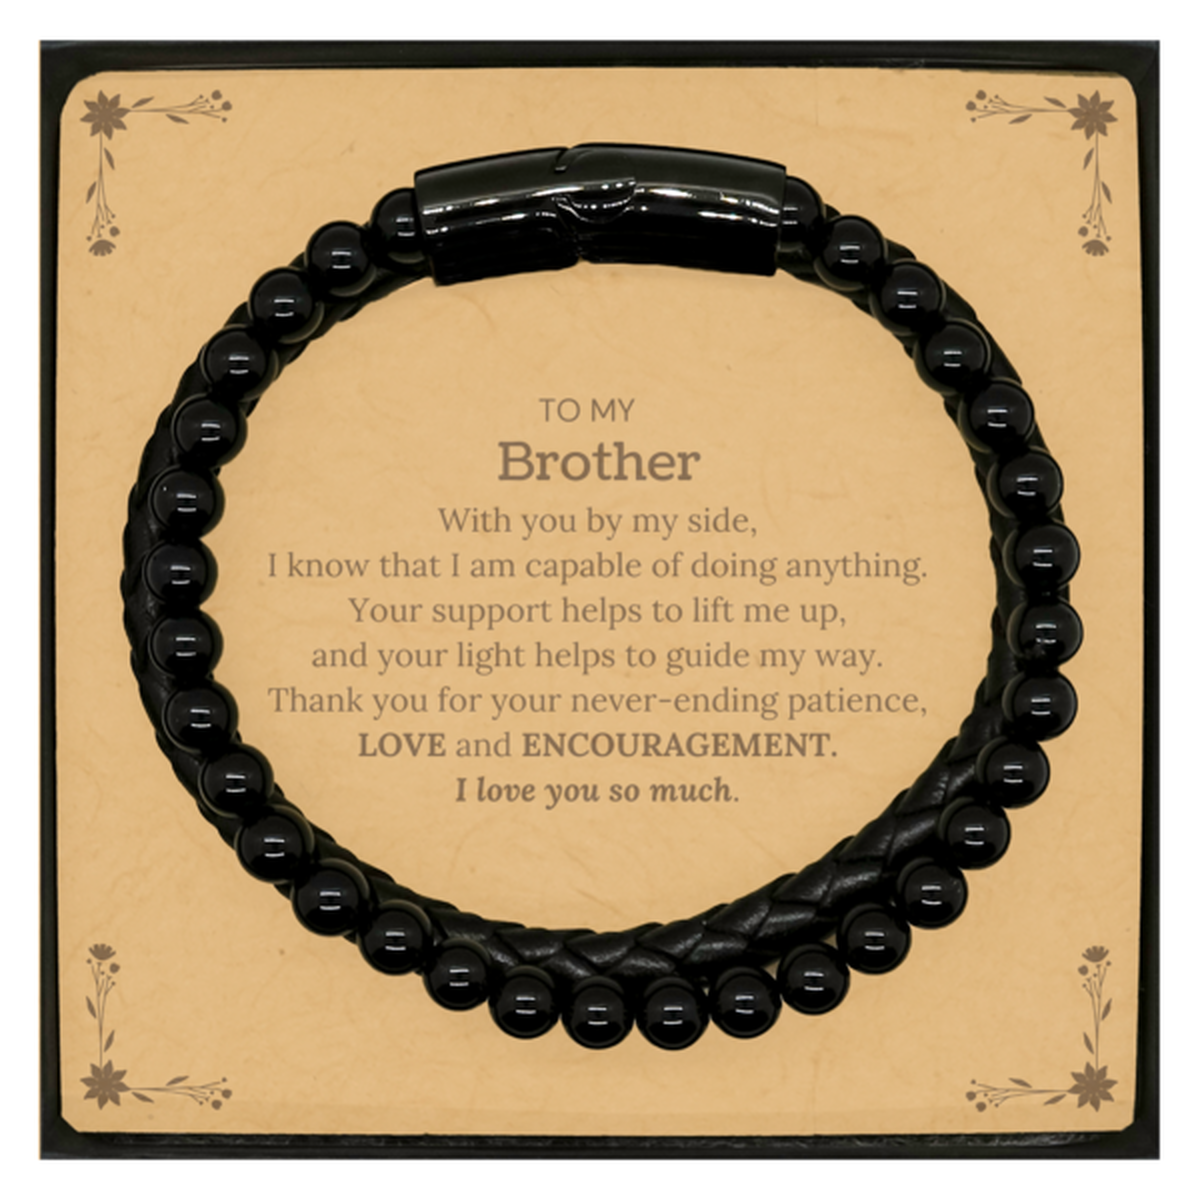 Appreciation Brother Stone Leather Bracelets Gifts, To My Brother Birthday Christmas Wedding Keepsake Gifts for Brother With you by my side, I know that I am capable of doing anything. I love you so much